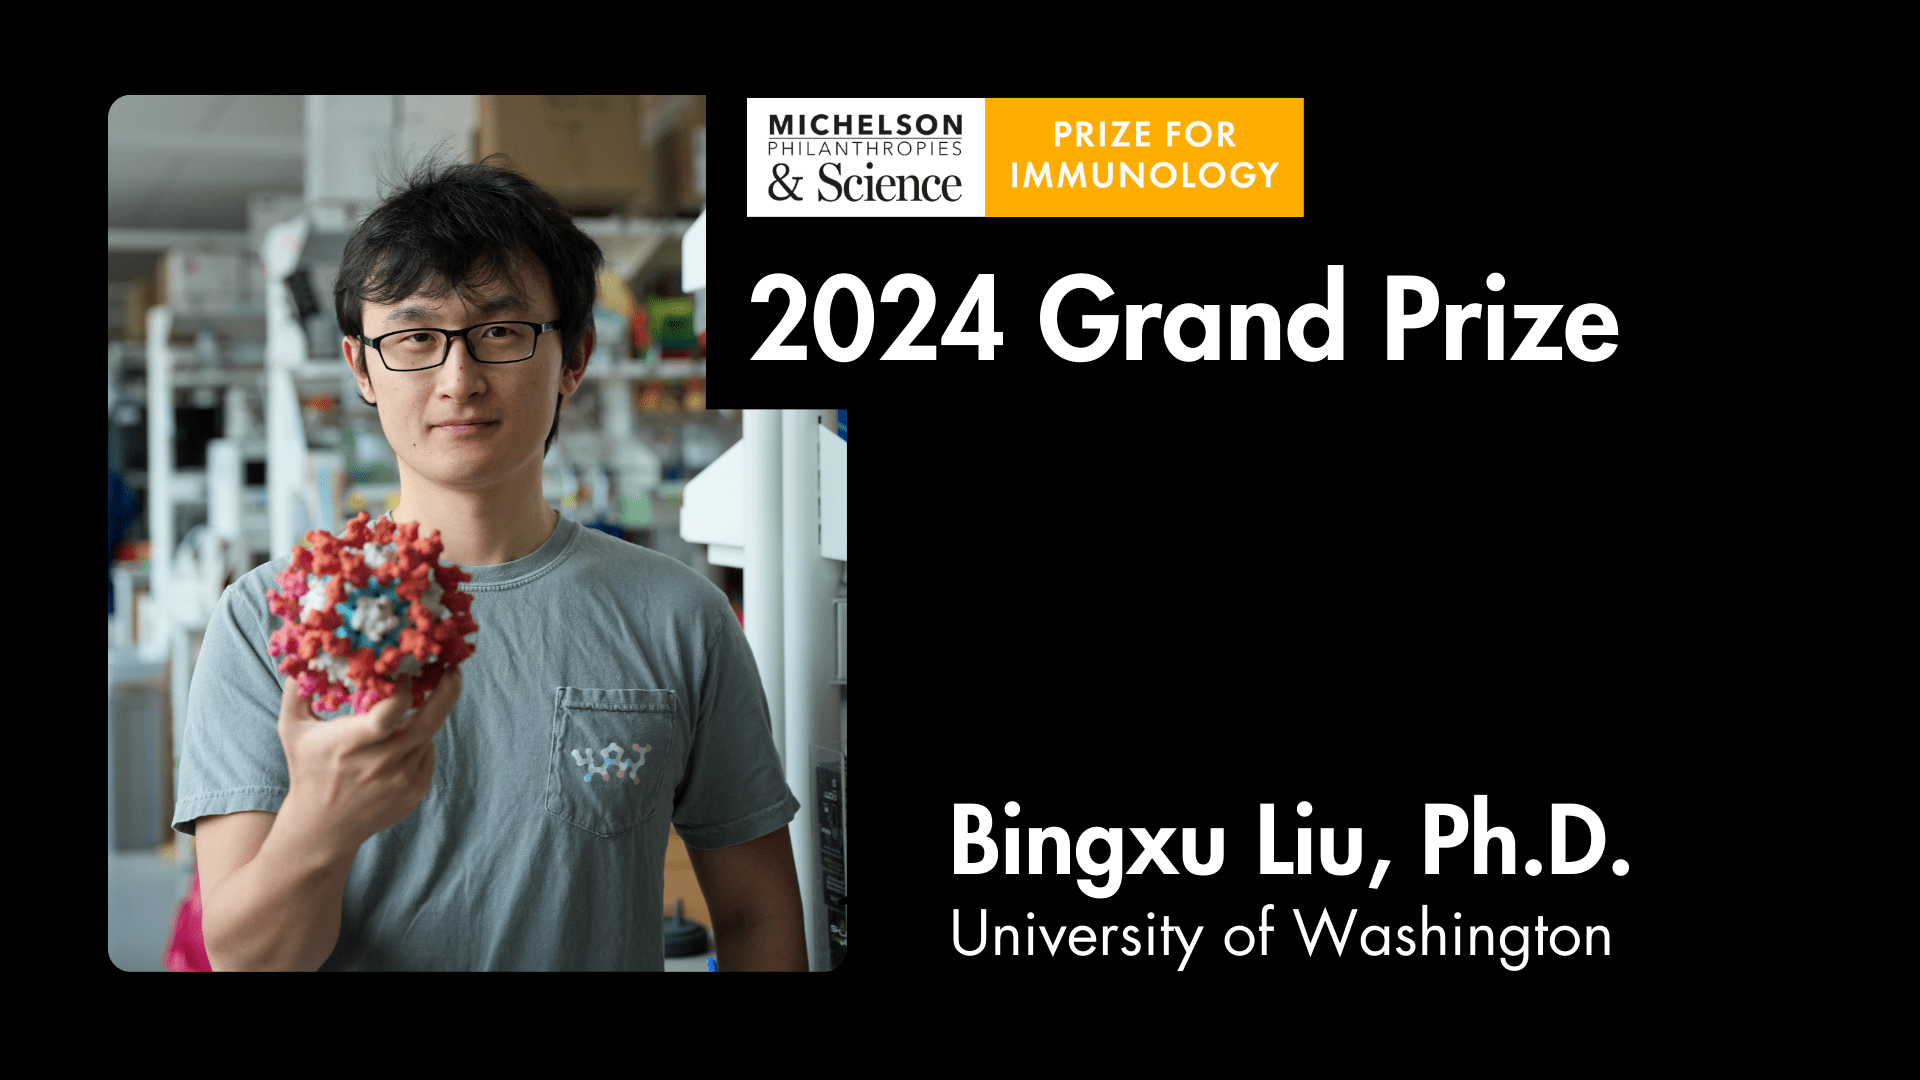 Coordinating the War on Pathogens: Dr. Bingxu Liu’s Research on Immune Proteins Wins 2024 Michelson Prize